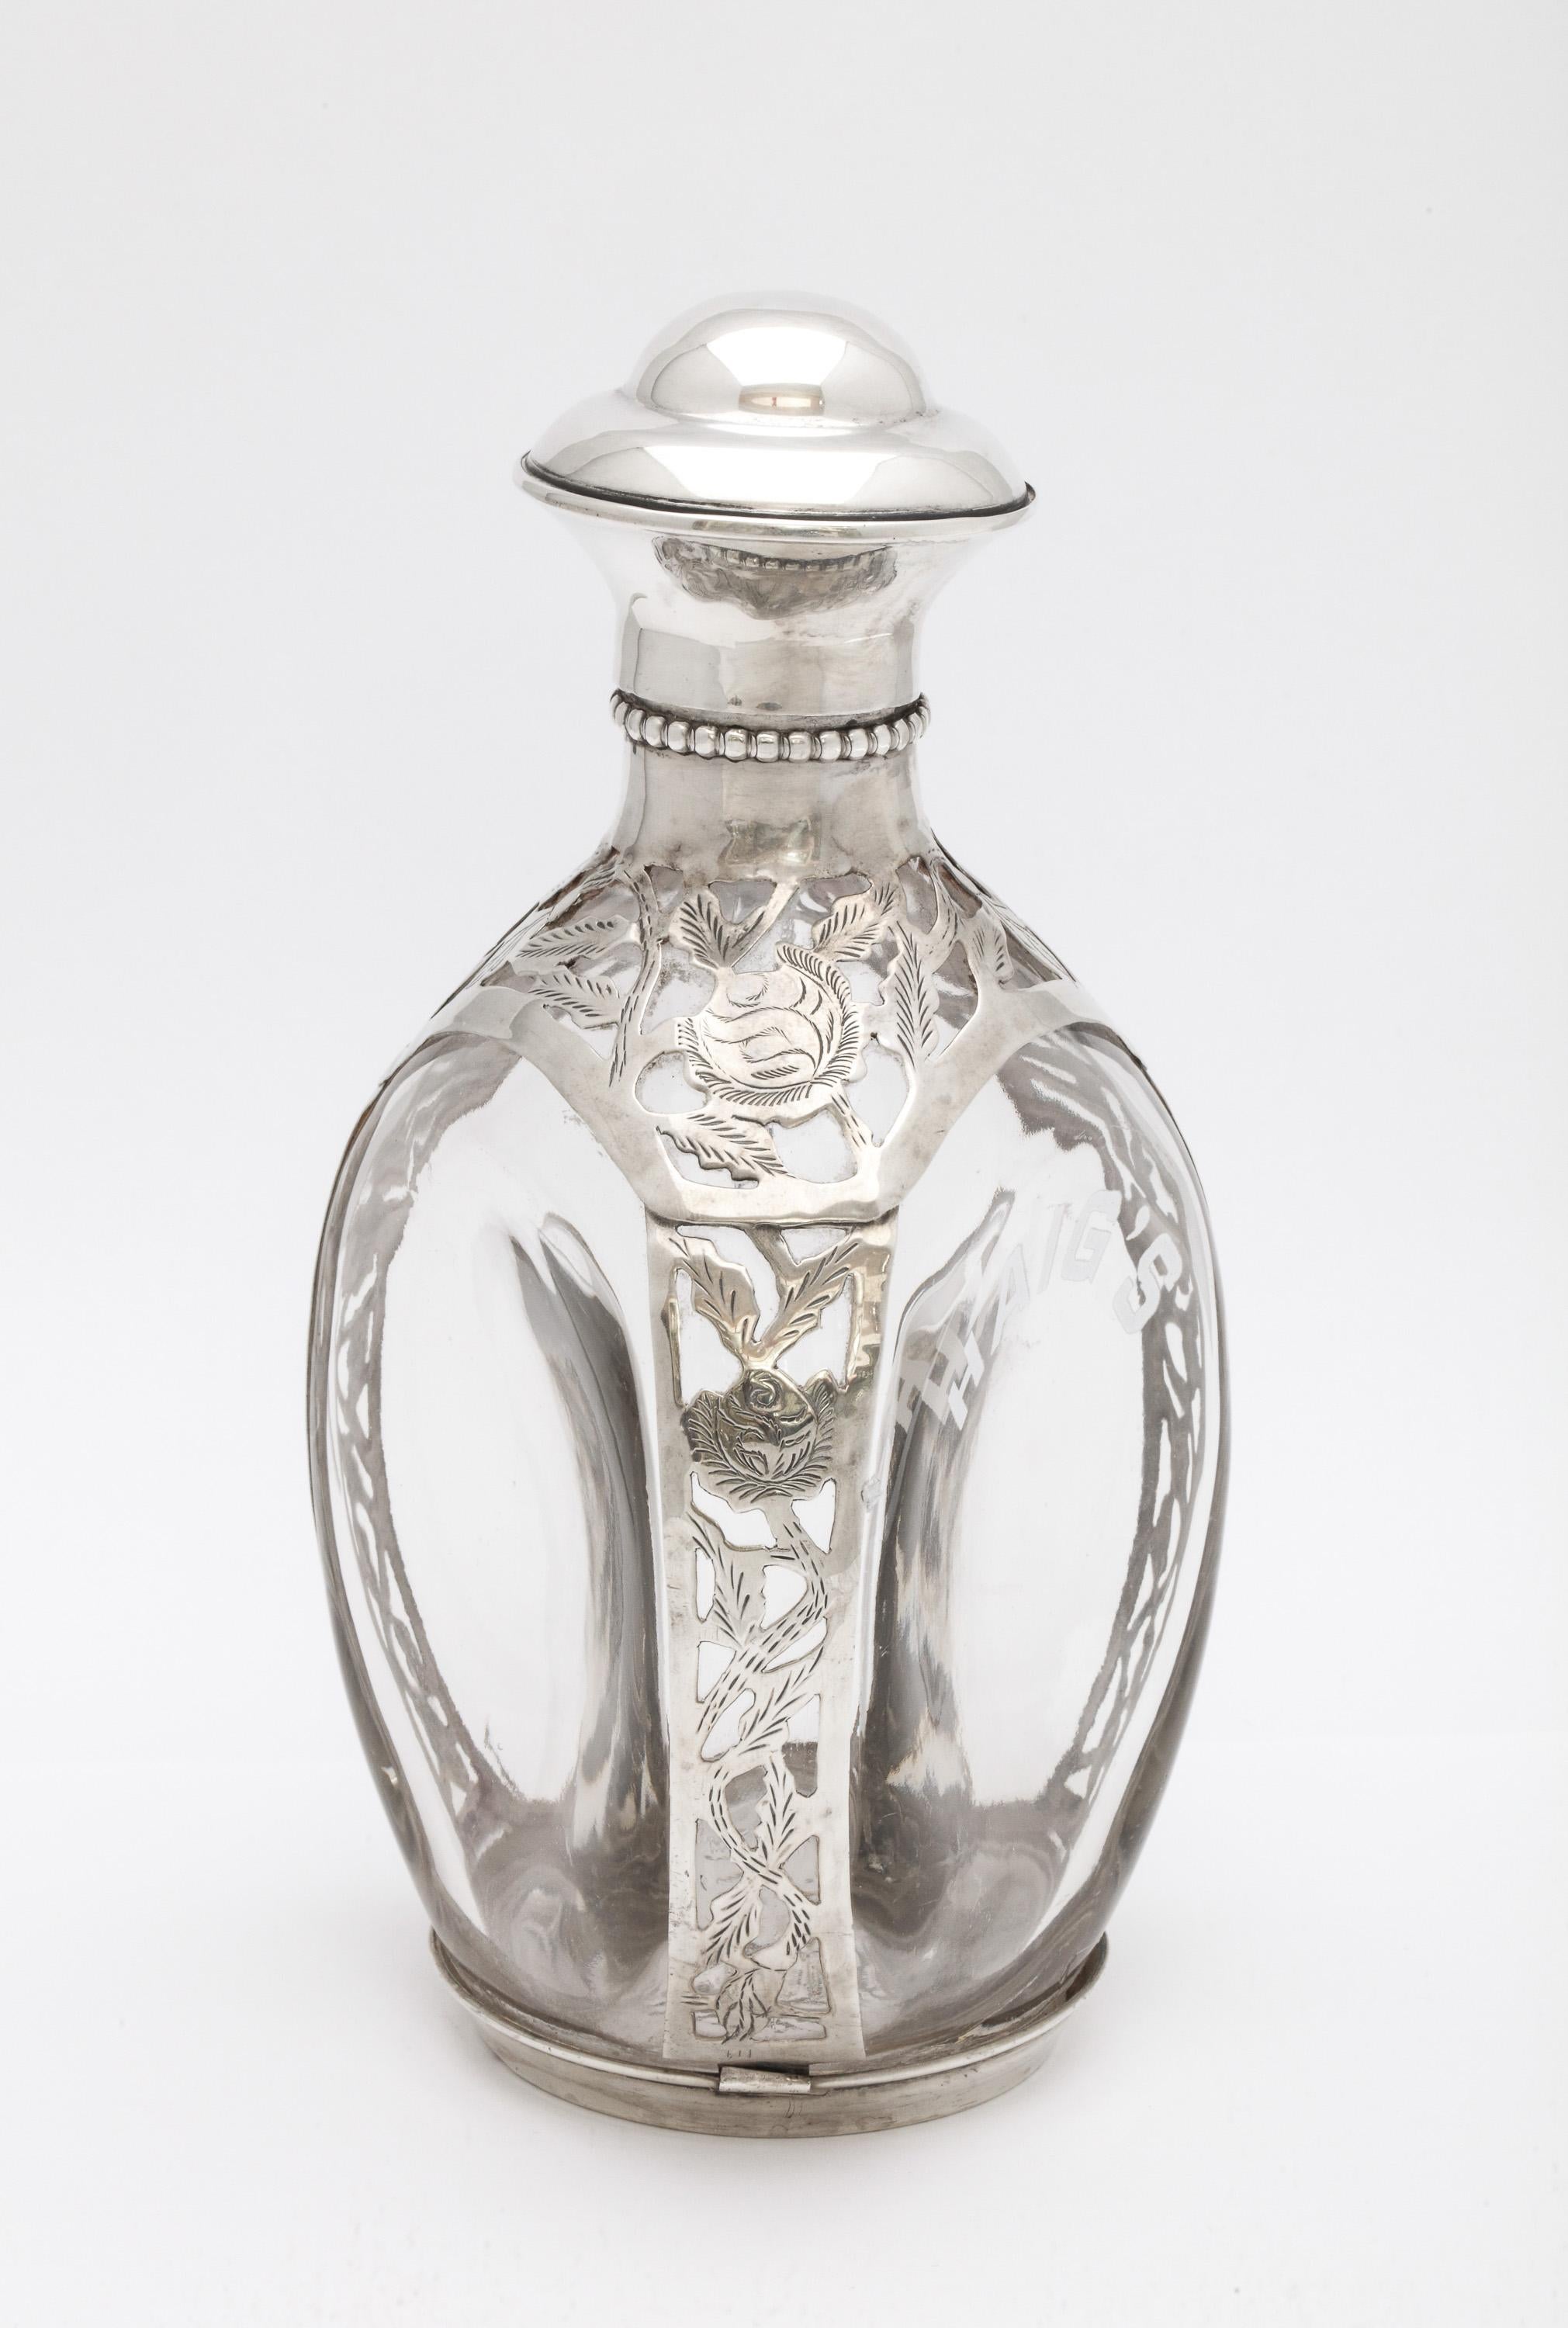 Blown Glass Mid-Century Modern Sterling Silver Floral Overlay Haig's Scotch Bottle